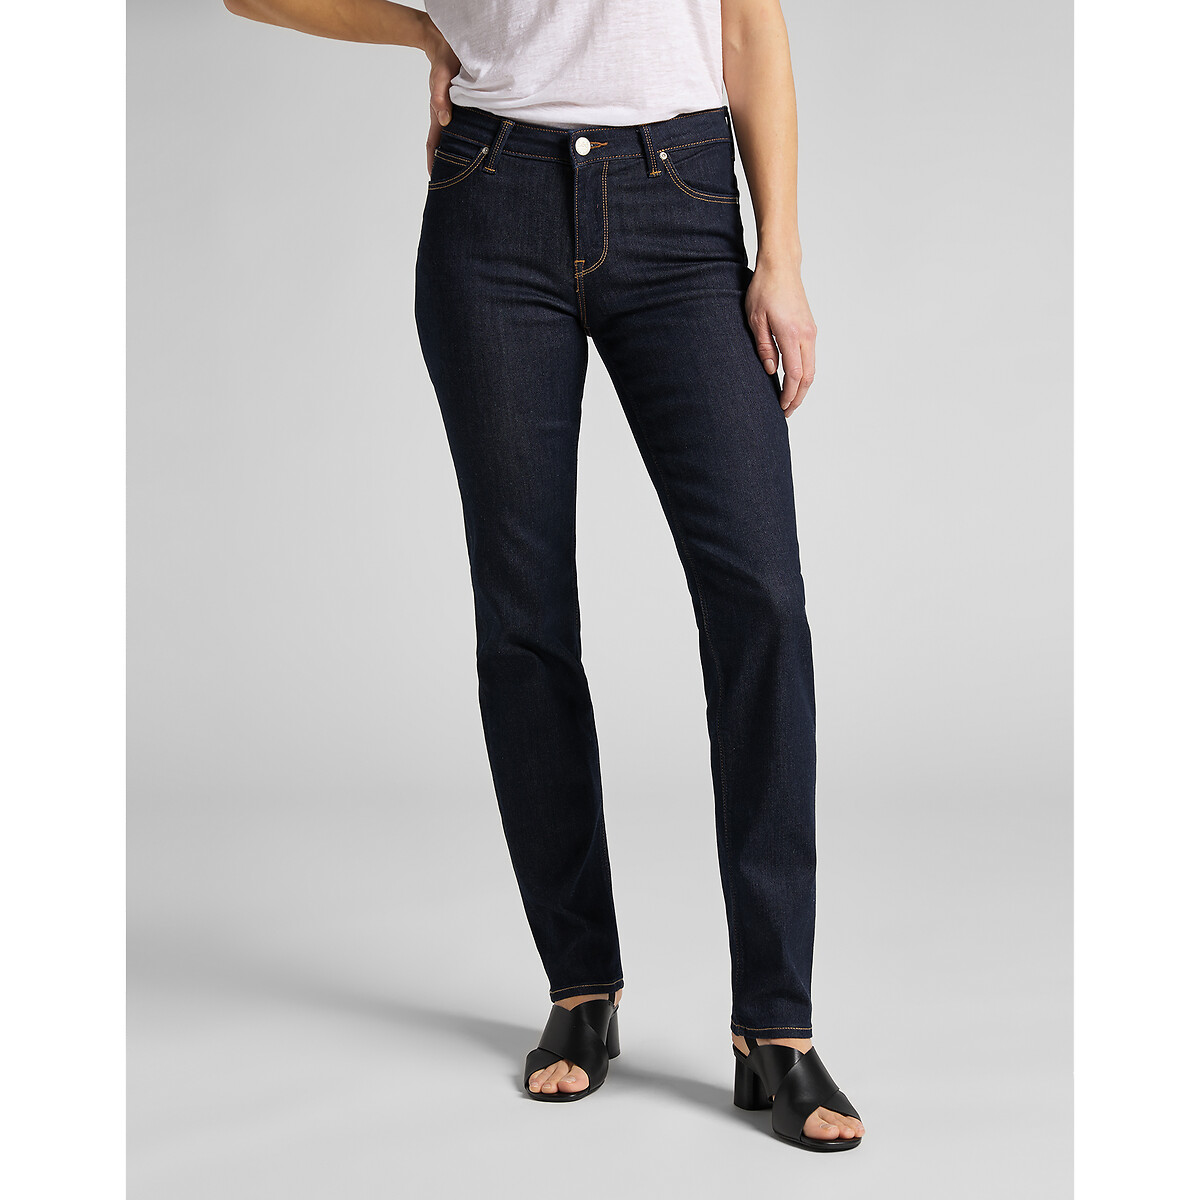 Image of Marion Straight Jeans, Mid Rise